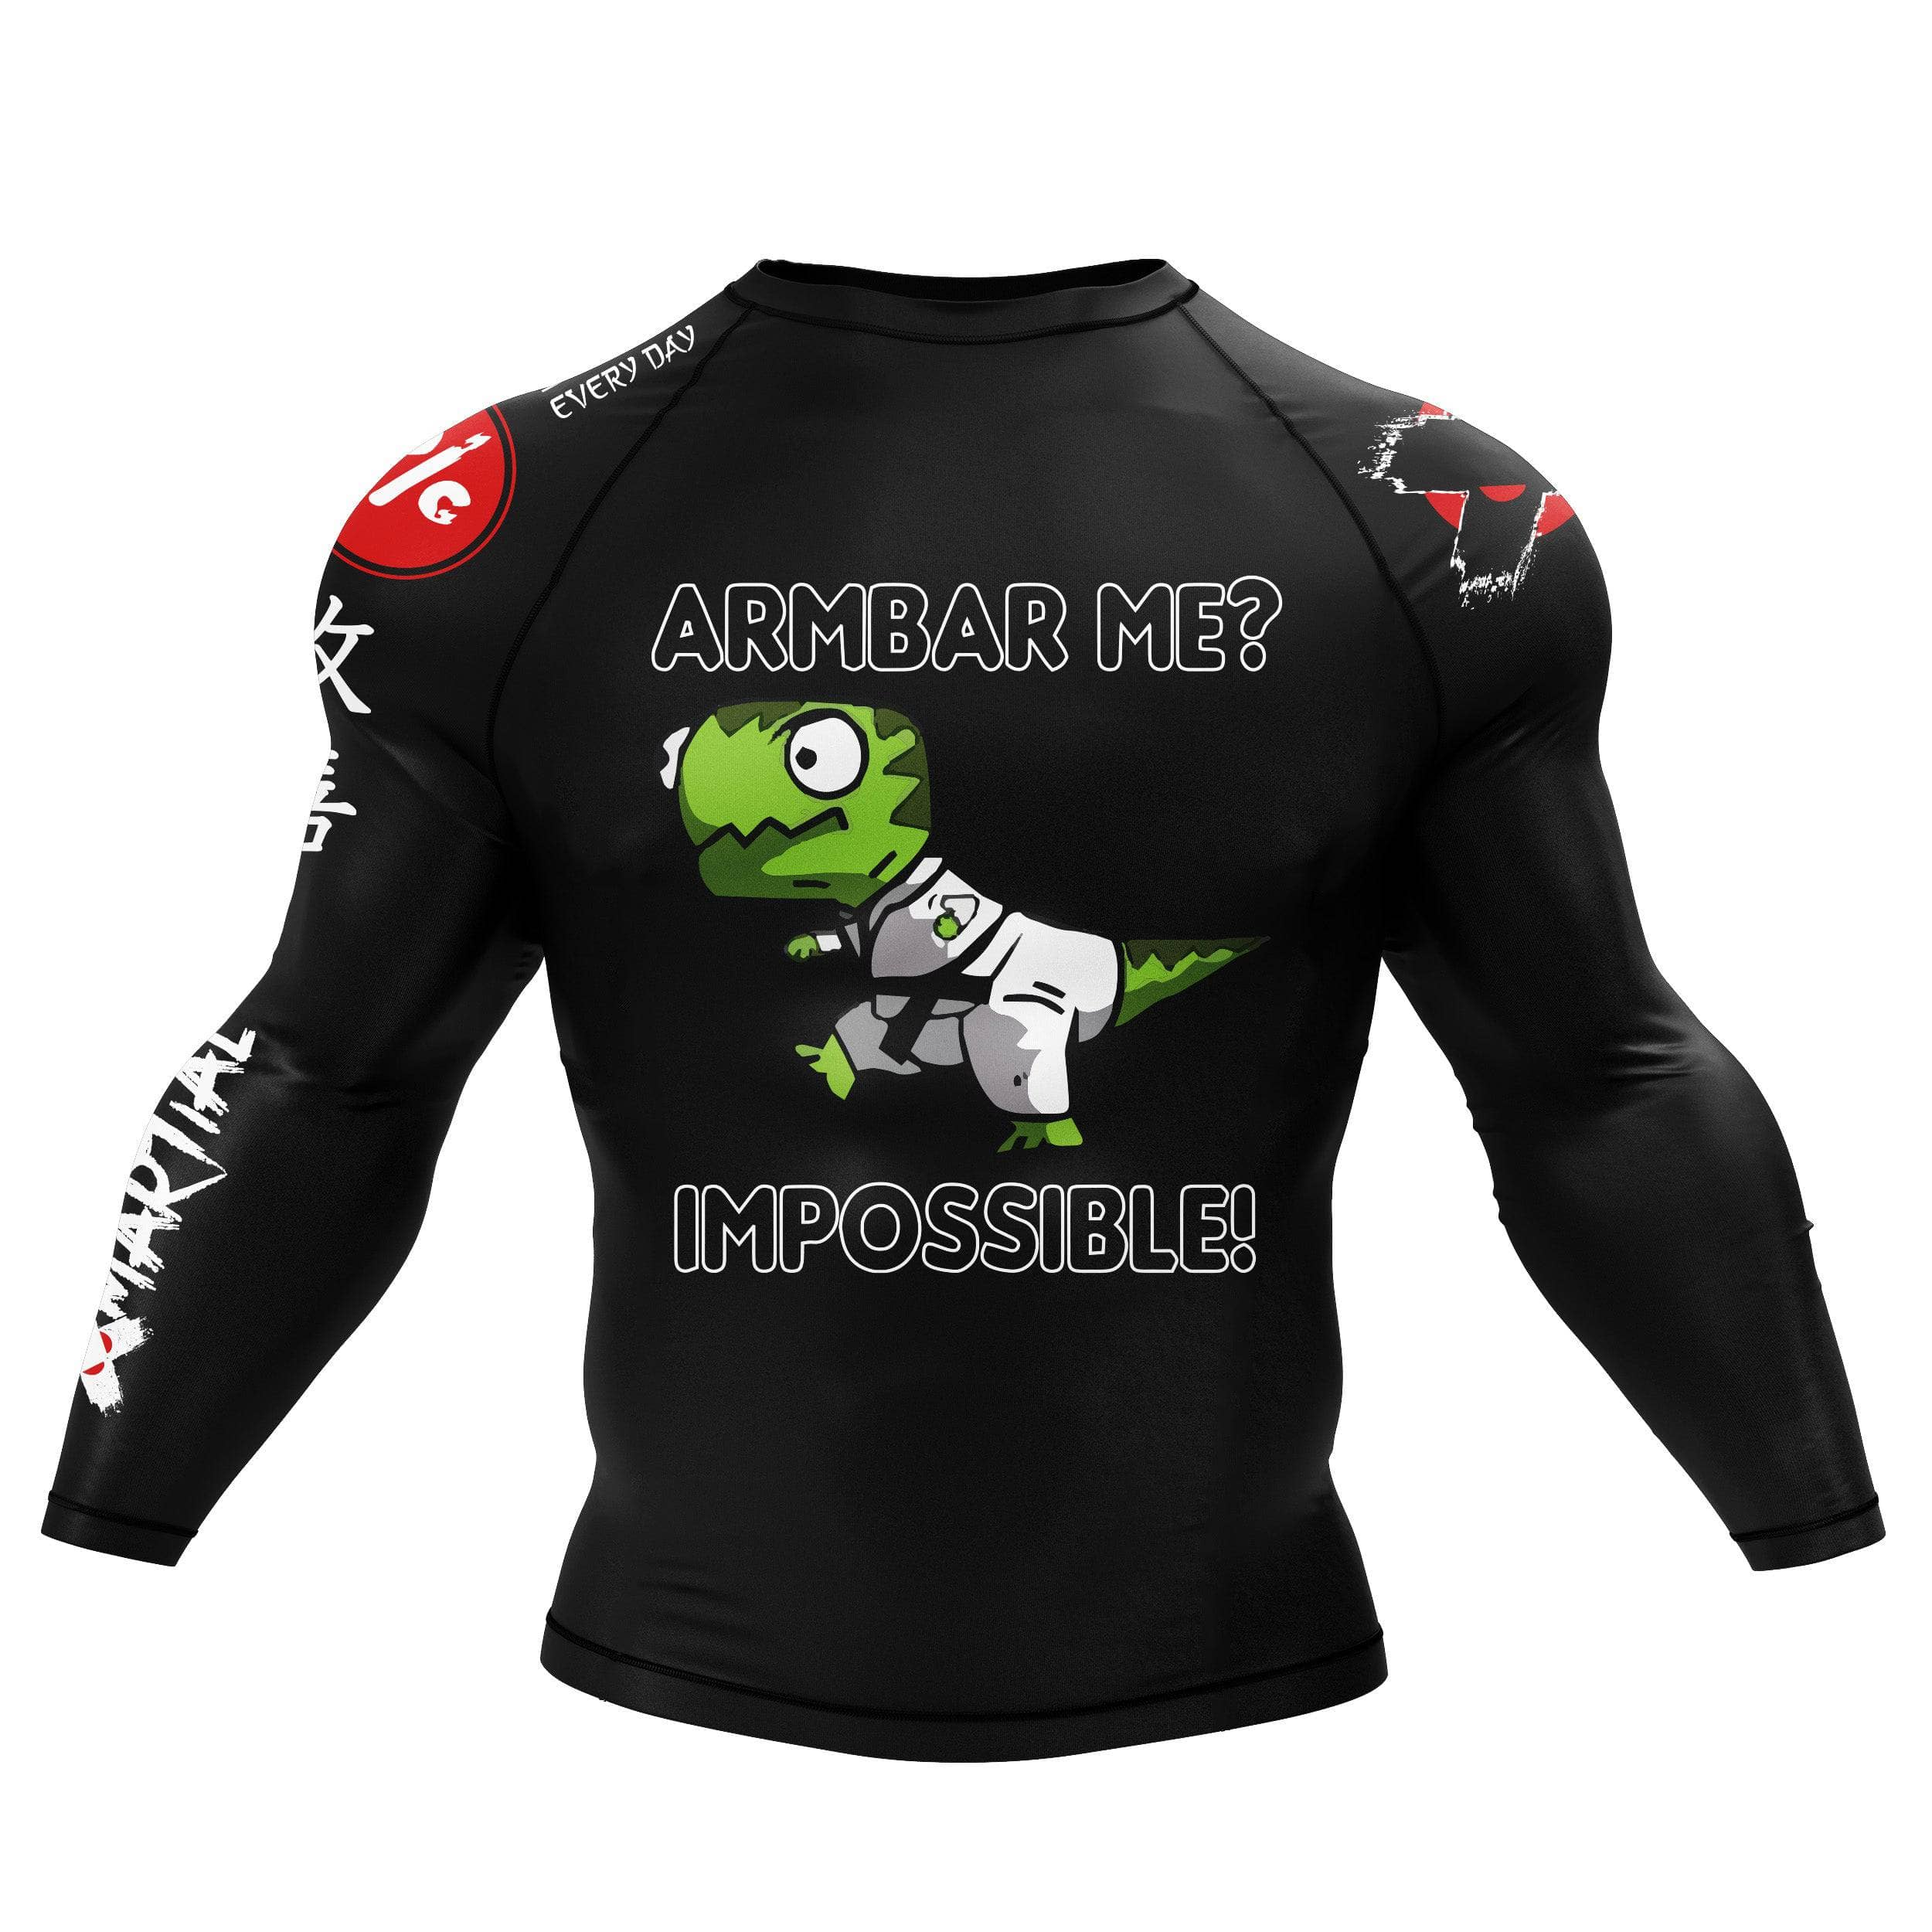 What Should You Wear Under Your BJJ Gi: A Rash Guard Shirt Or A T